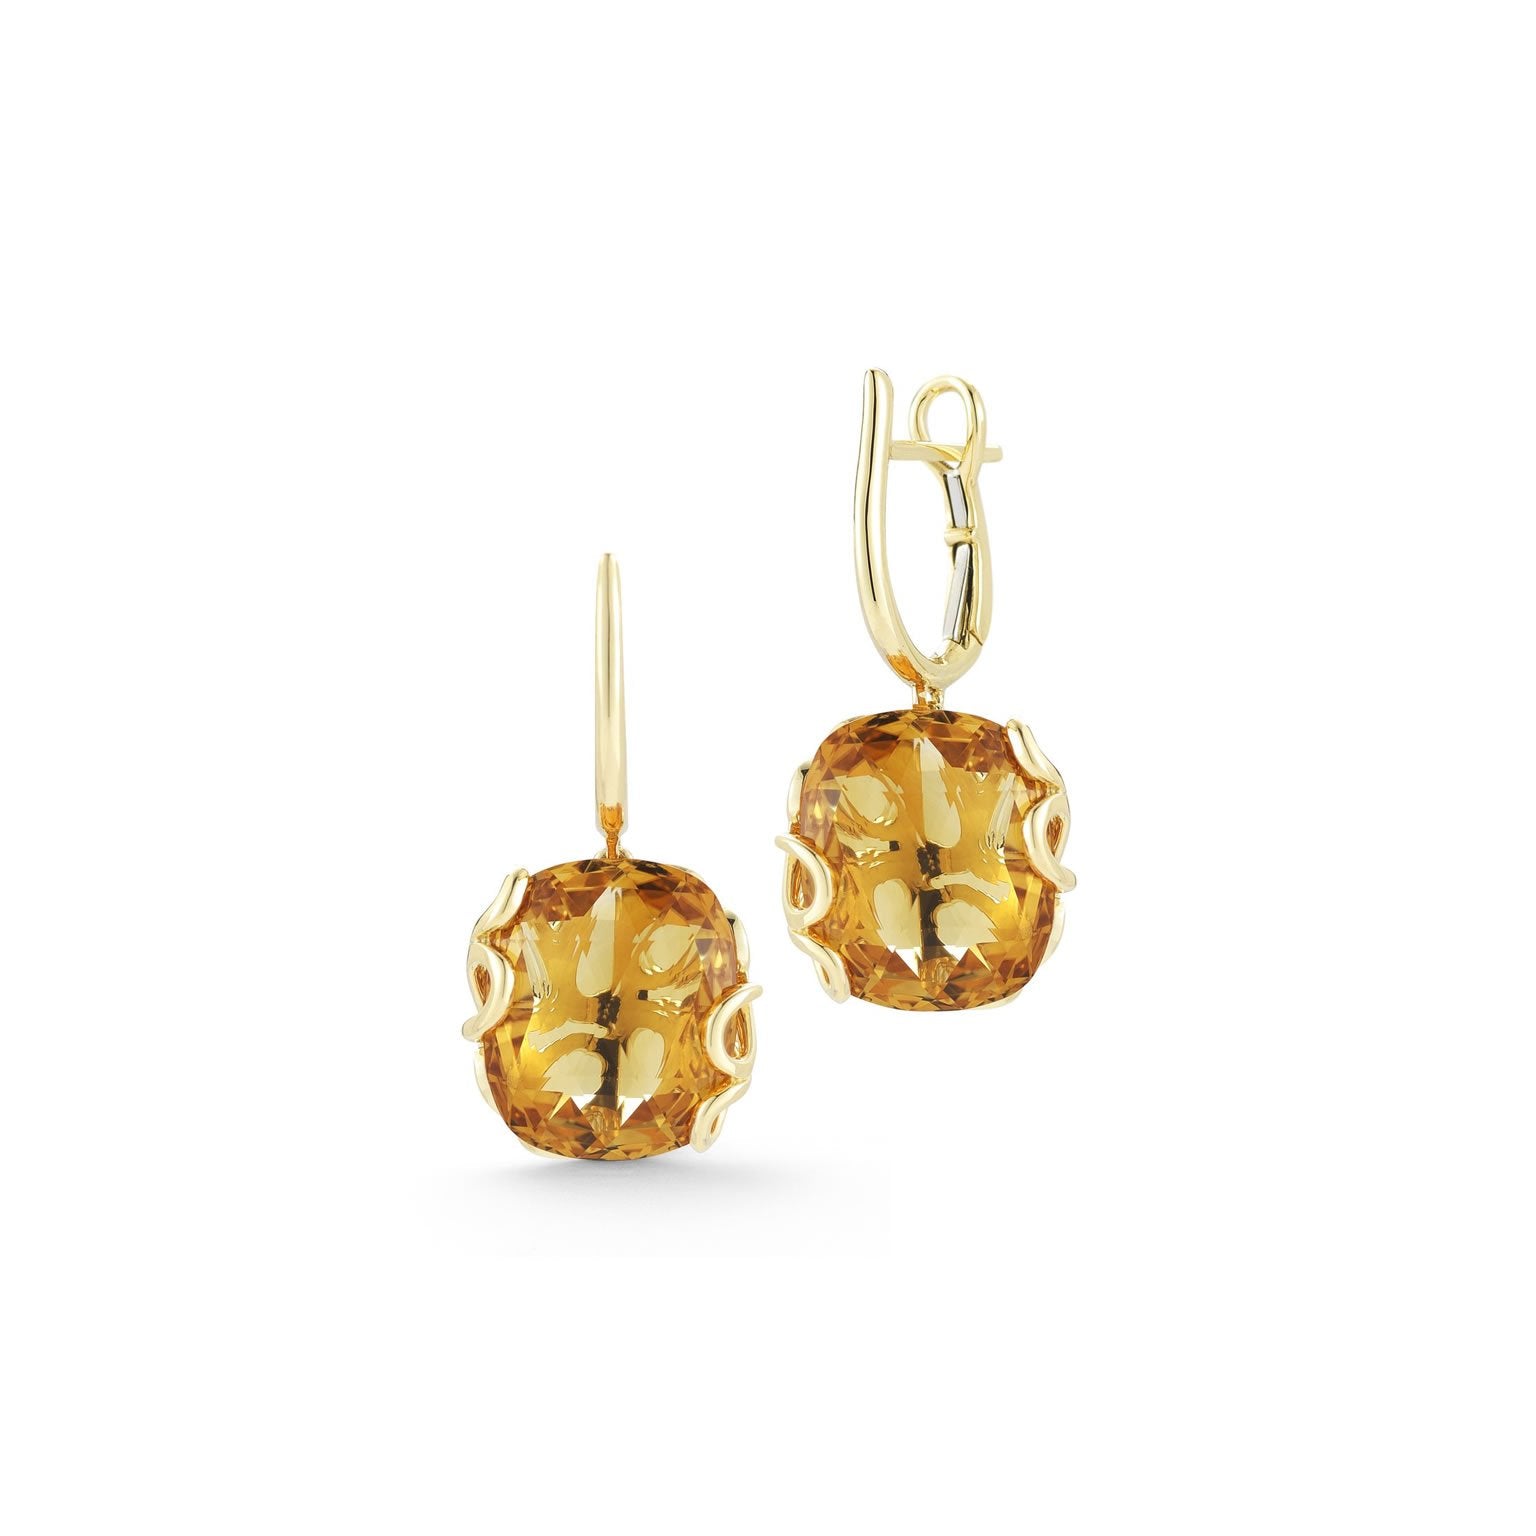 Sea Leaf earrings in 18K yellow gold with leaf motif back and citrine